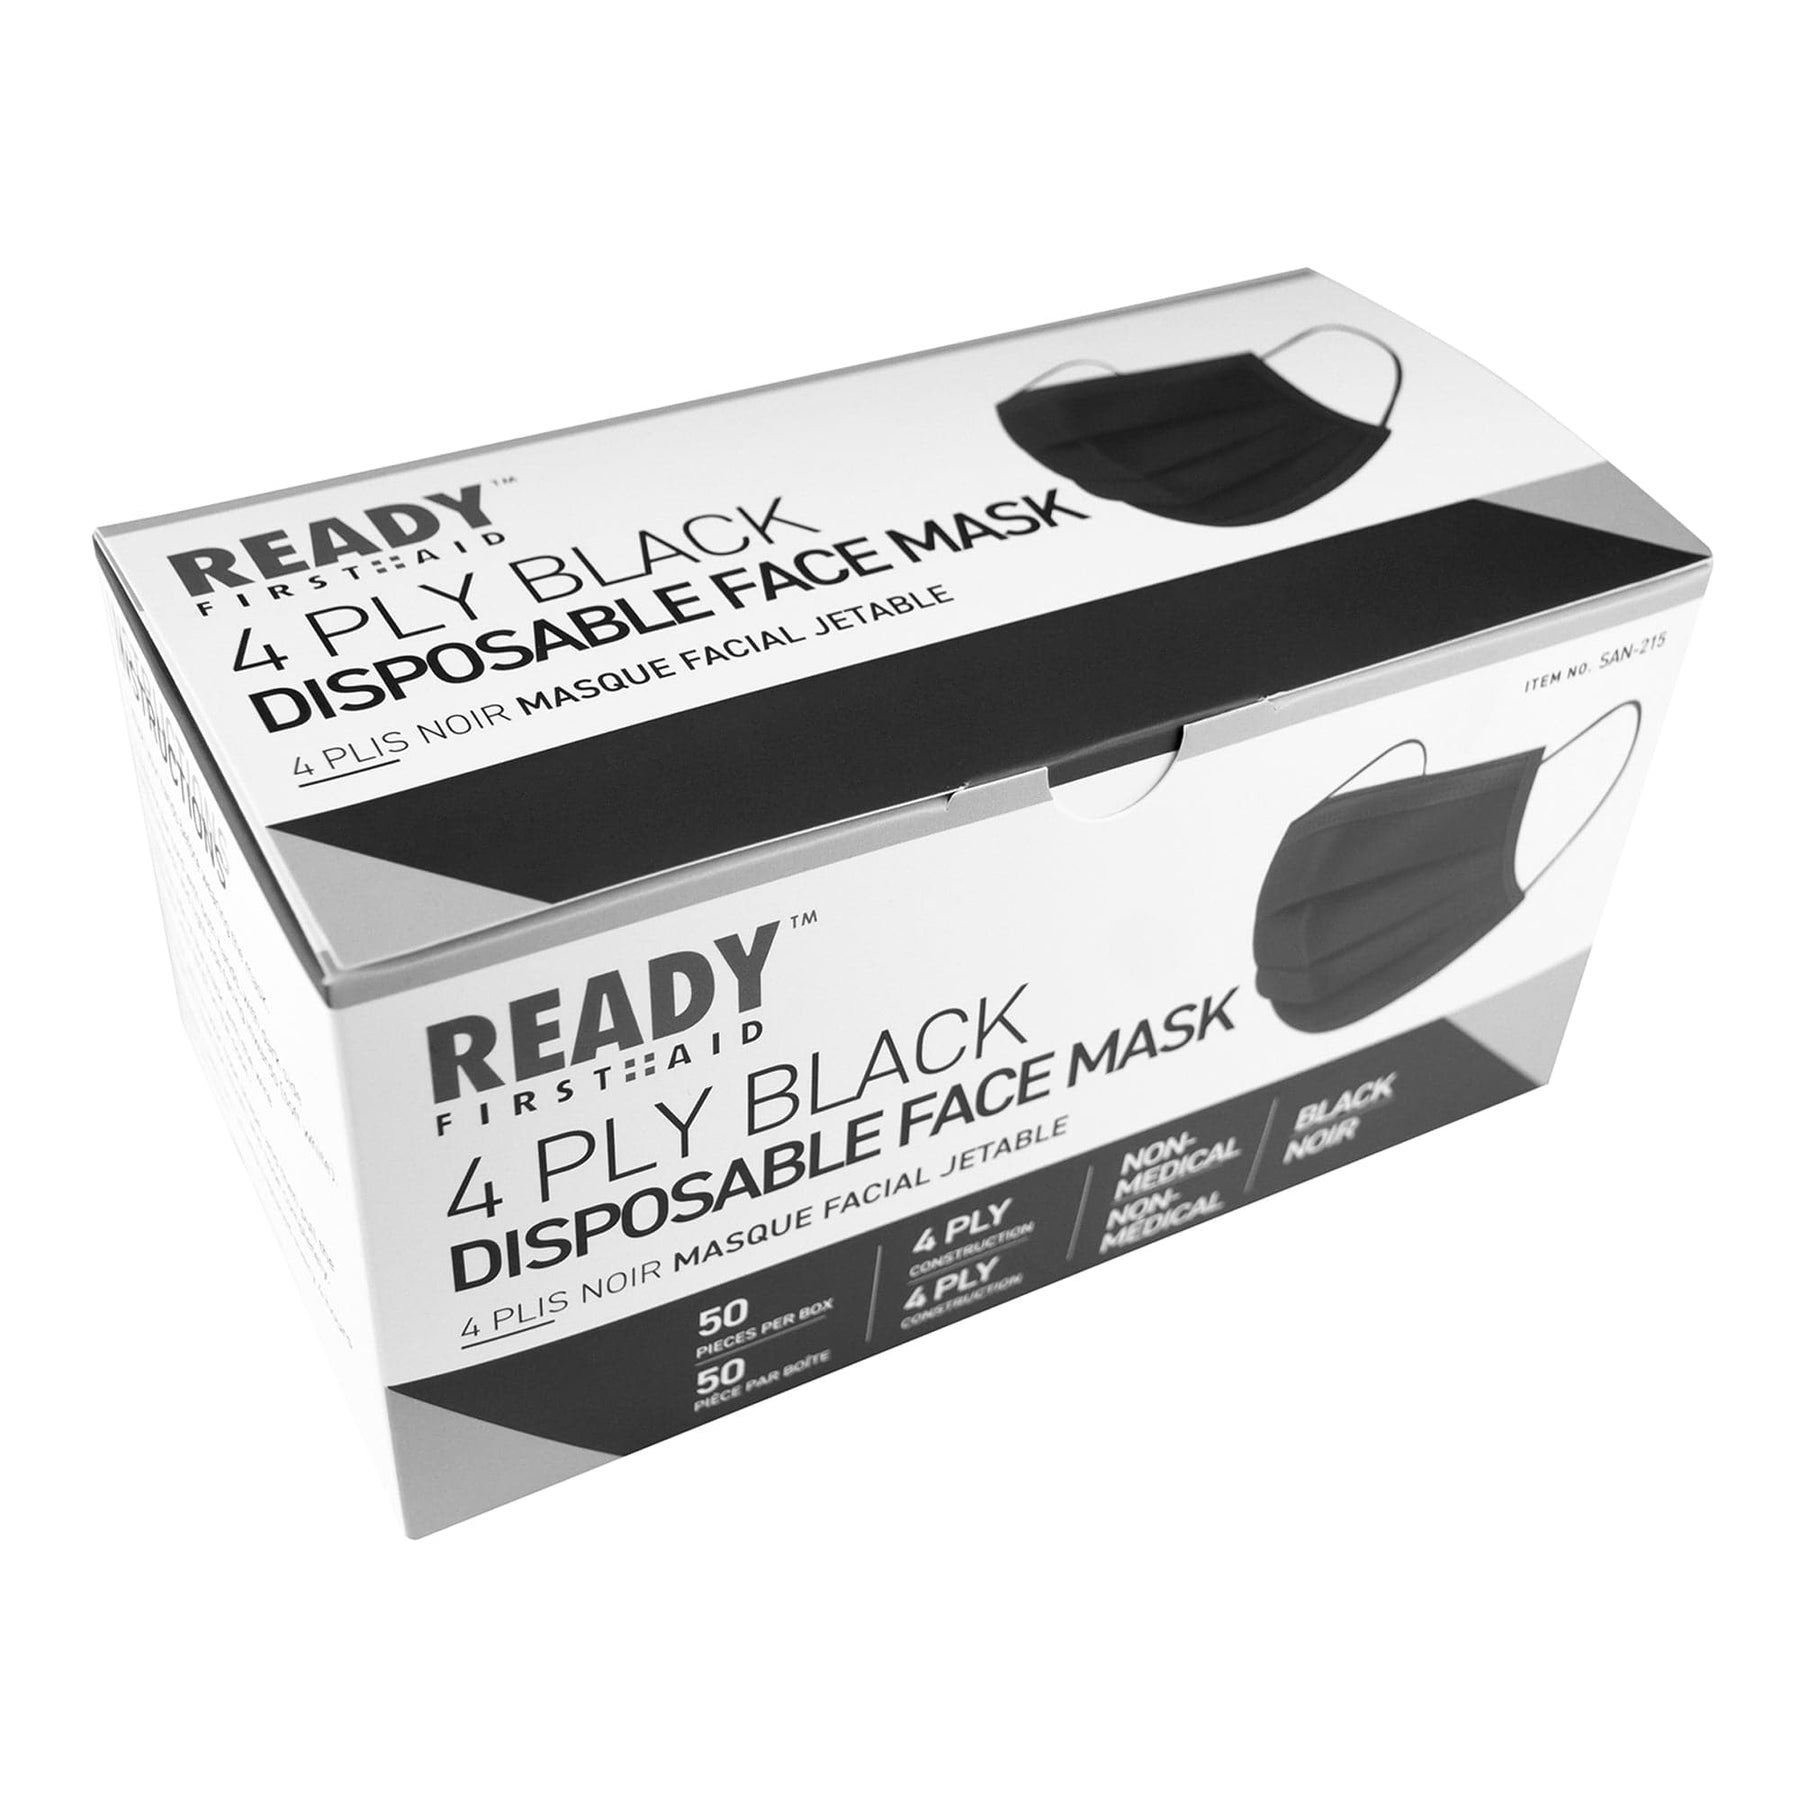 4-PLY Earloop Disposable Face Mask, Black, Box of 50 - Ready First